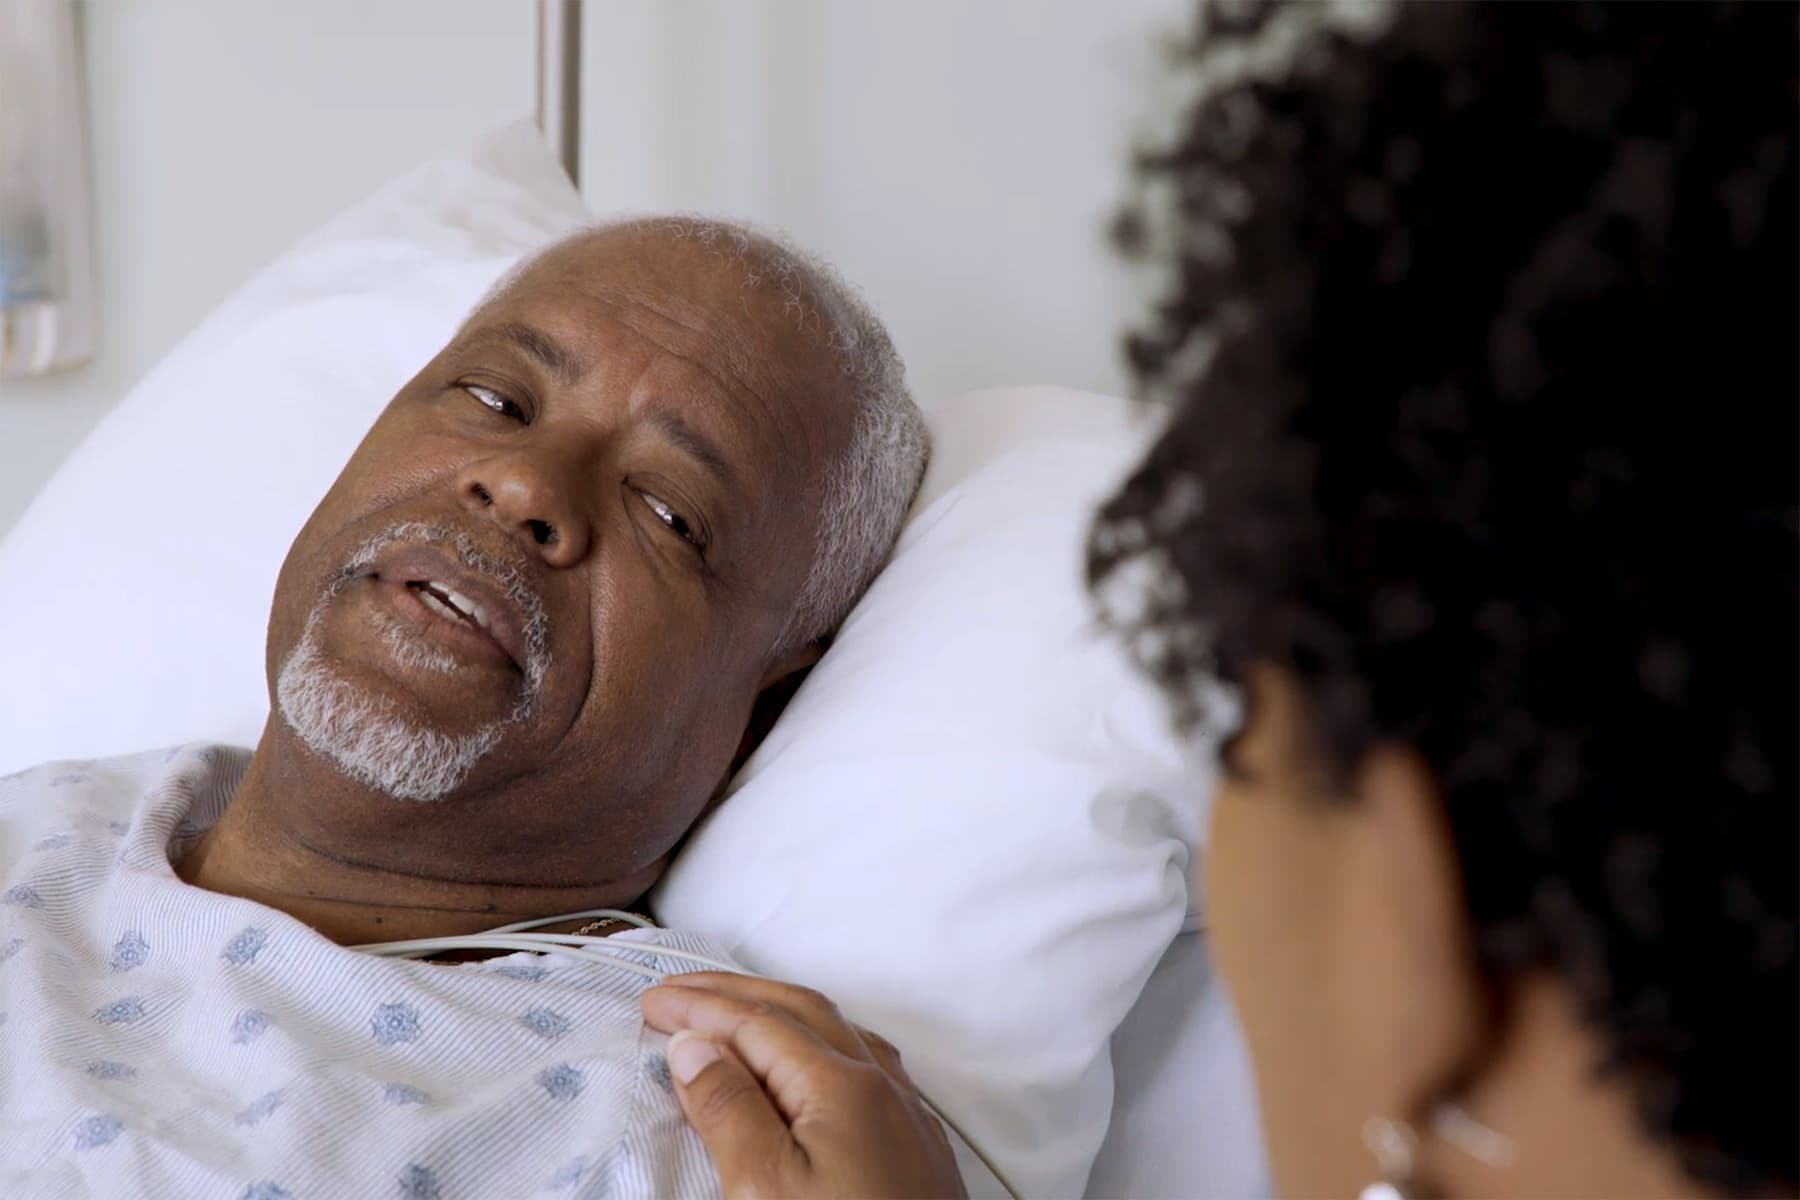 Black people are less likely to be prescribed dementia drugs